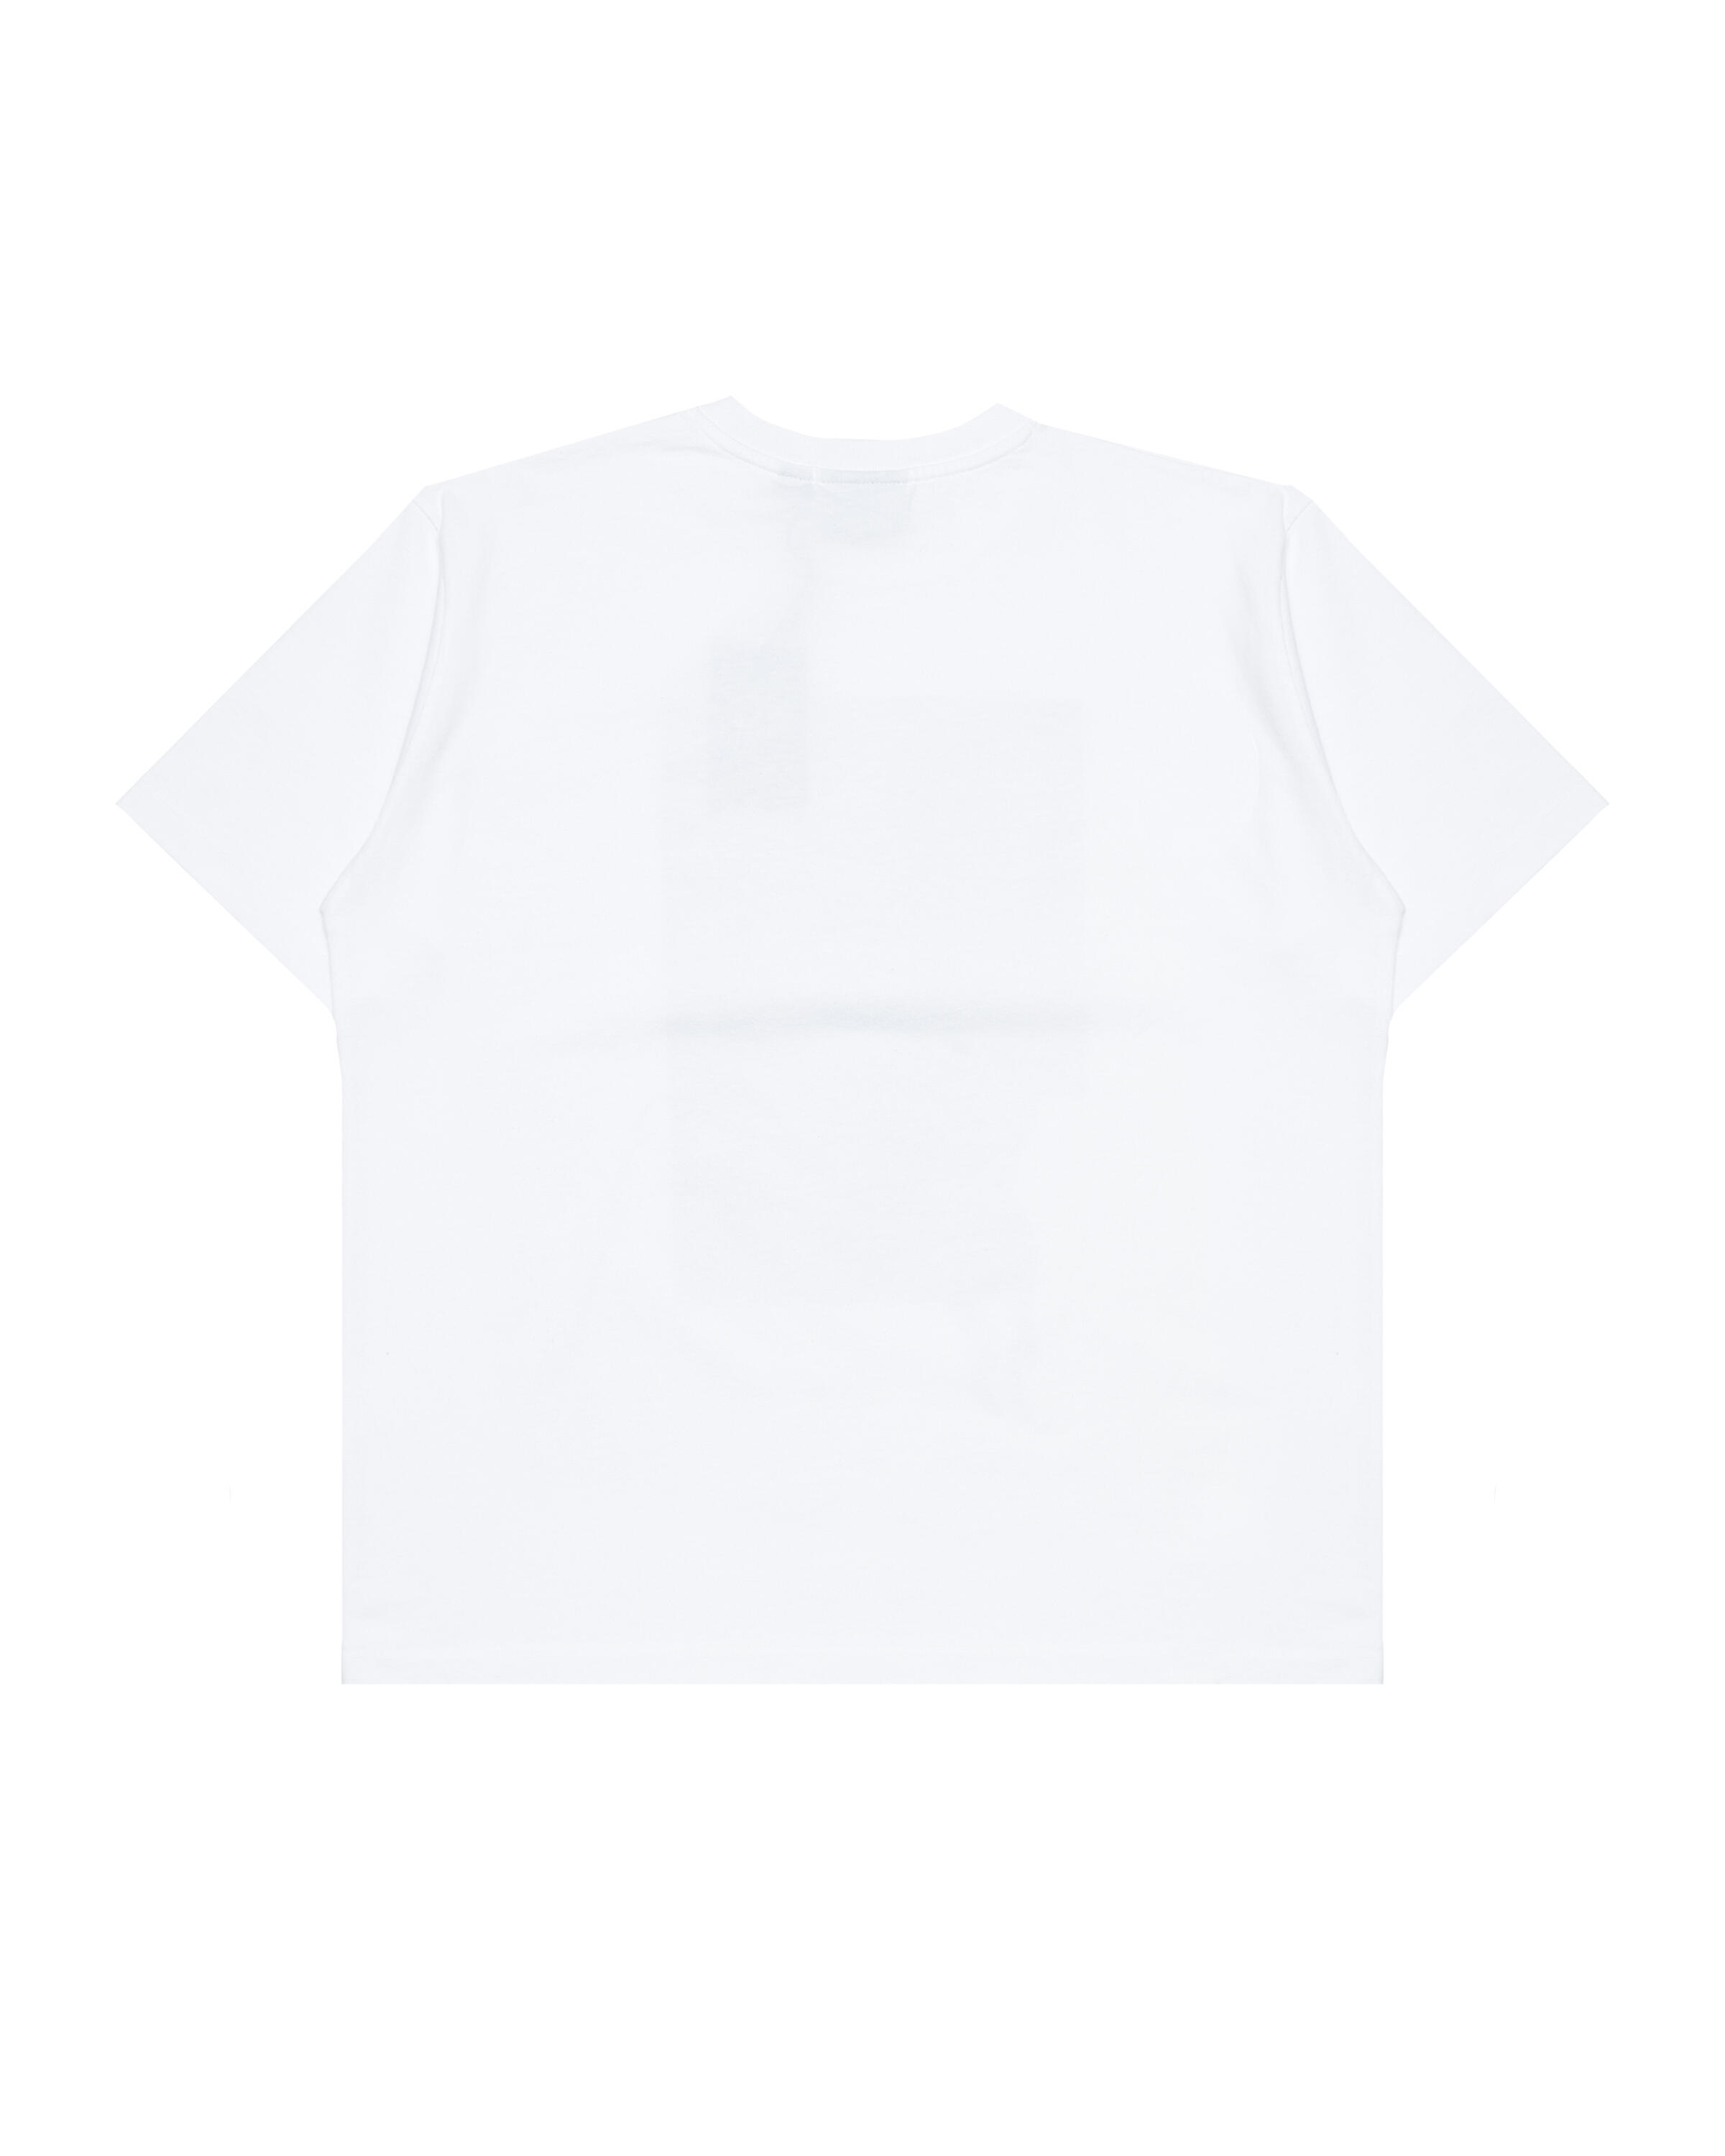 by Parra beached and blank t-shirt